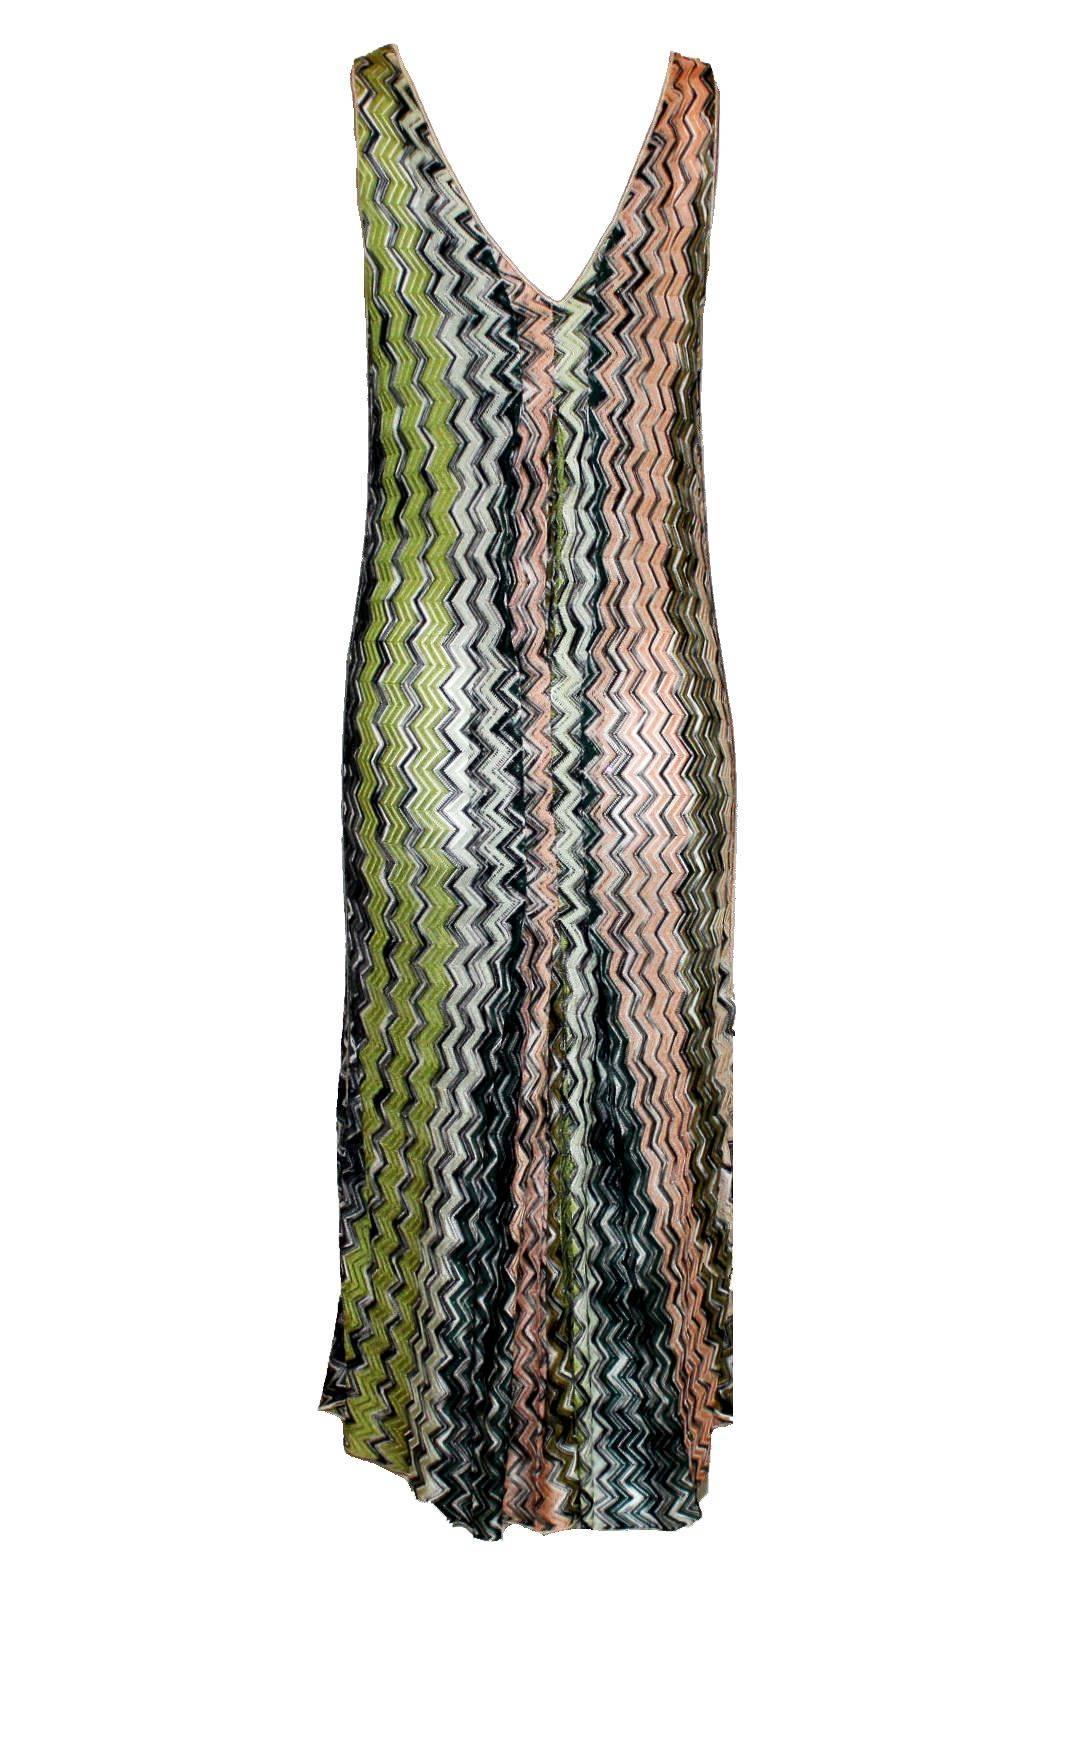 Beautiful Missoni Crochet Knit Dress
Missoni Signature piece in the famous zigzag design
Pleated details in front and back
Box pleat skirt
Deep V-Neck
Beige trimming
Unlined
Made in Italy
Dry Clean Only
